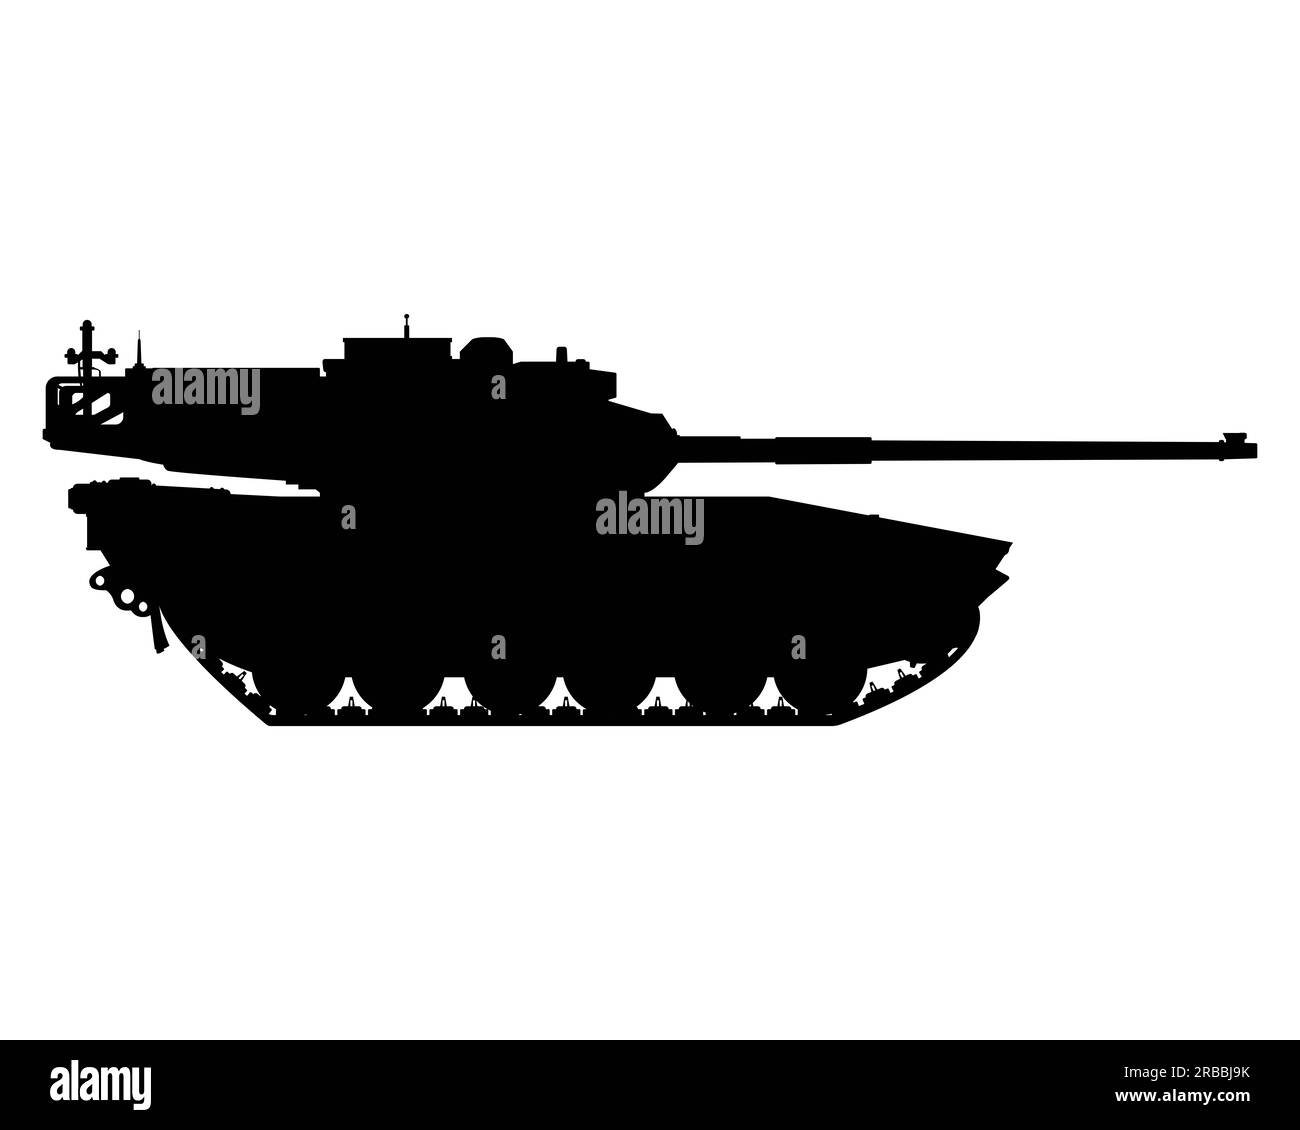 Main battle tank silhouette. Armored fighting vehicle. Special combat military transport. Illustration isolated on white background. Stock Photo